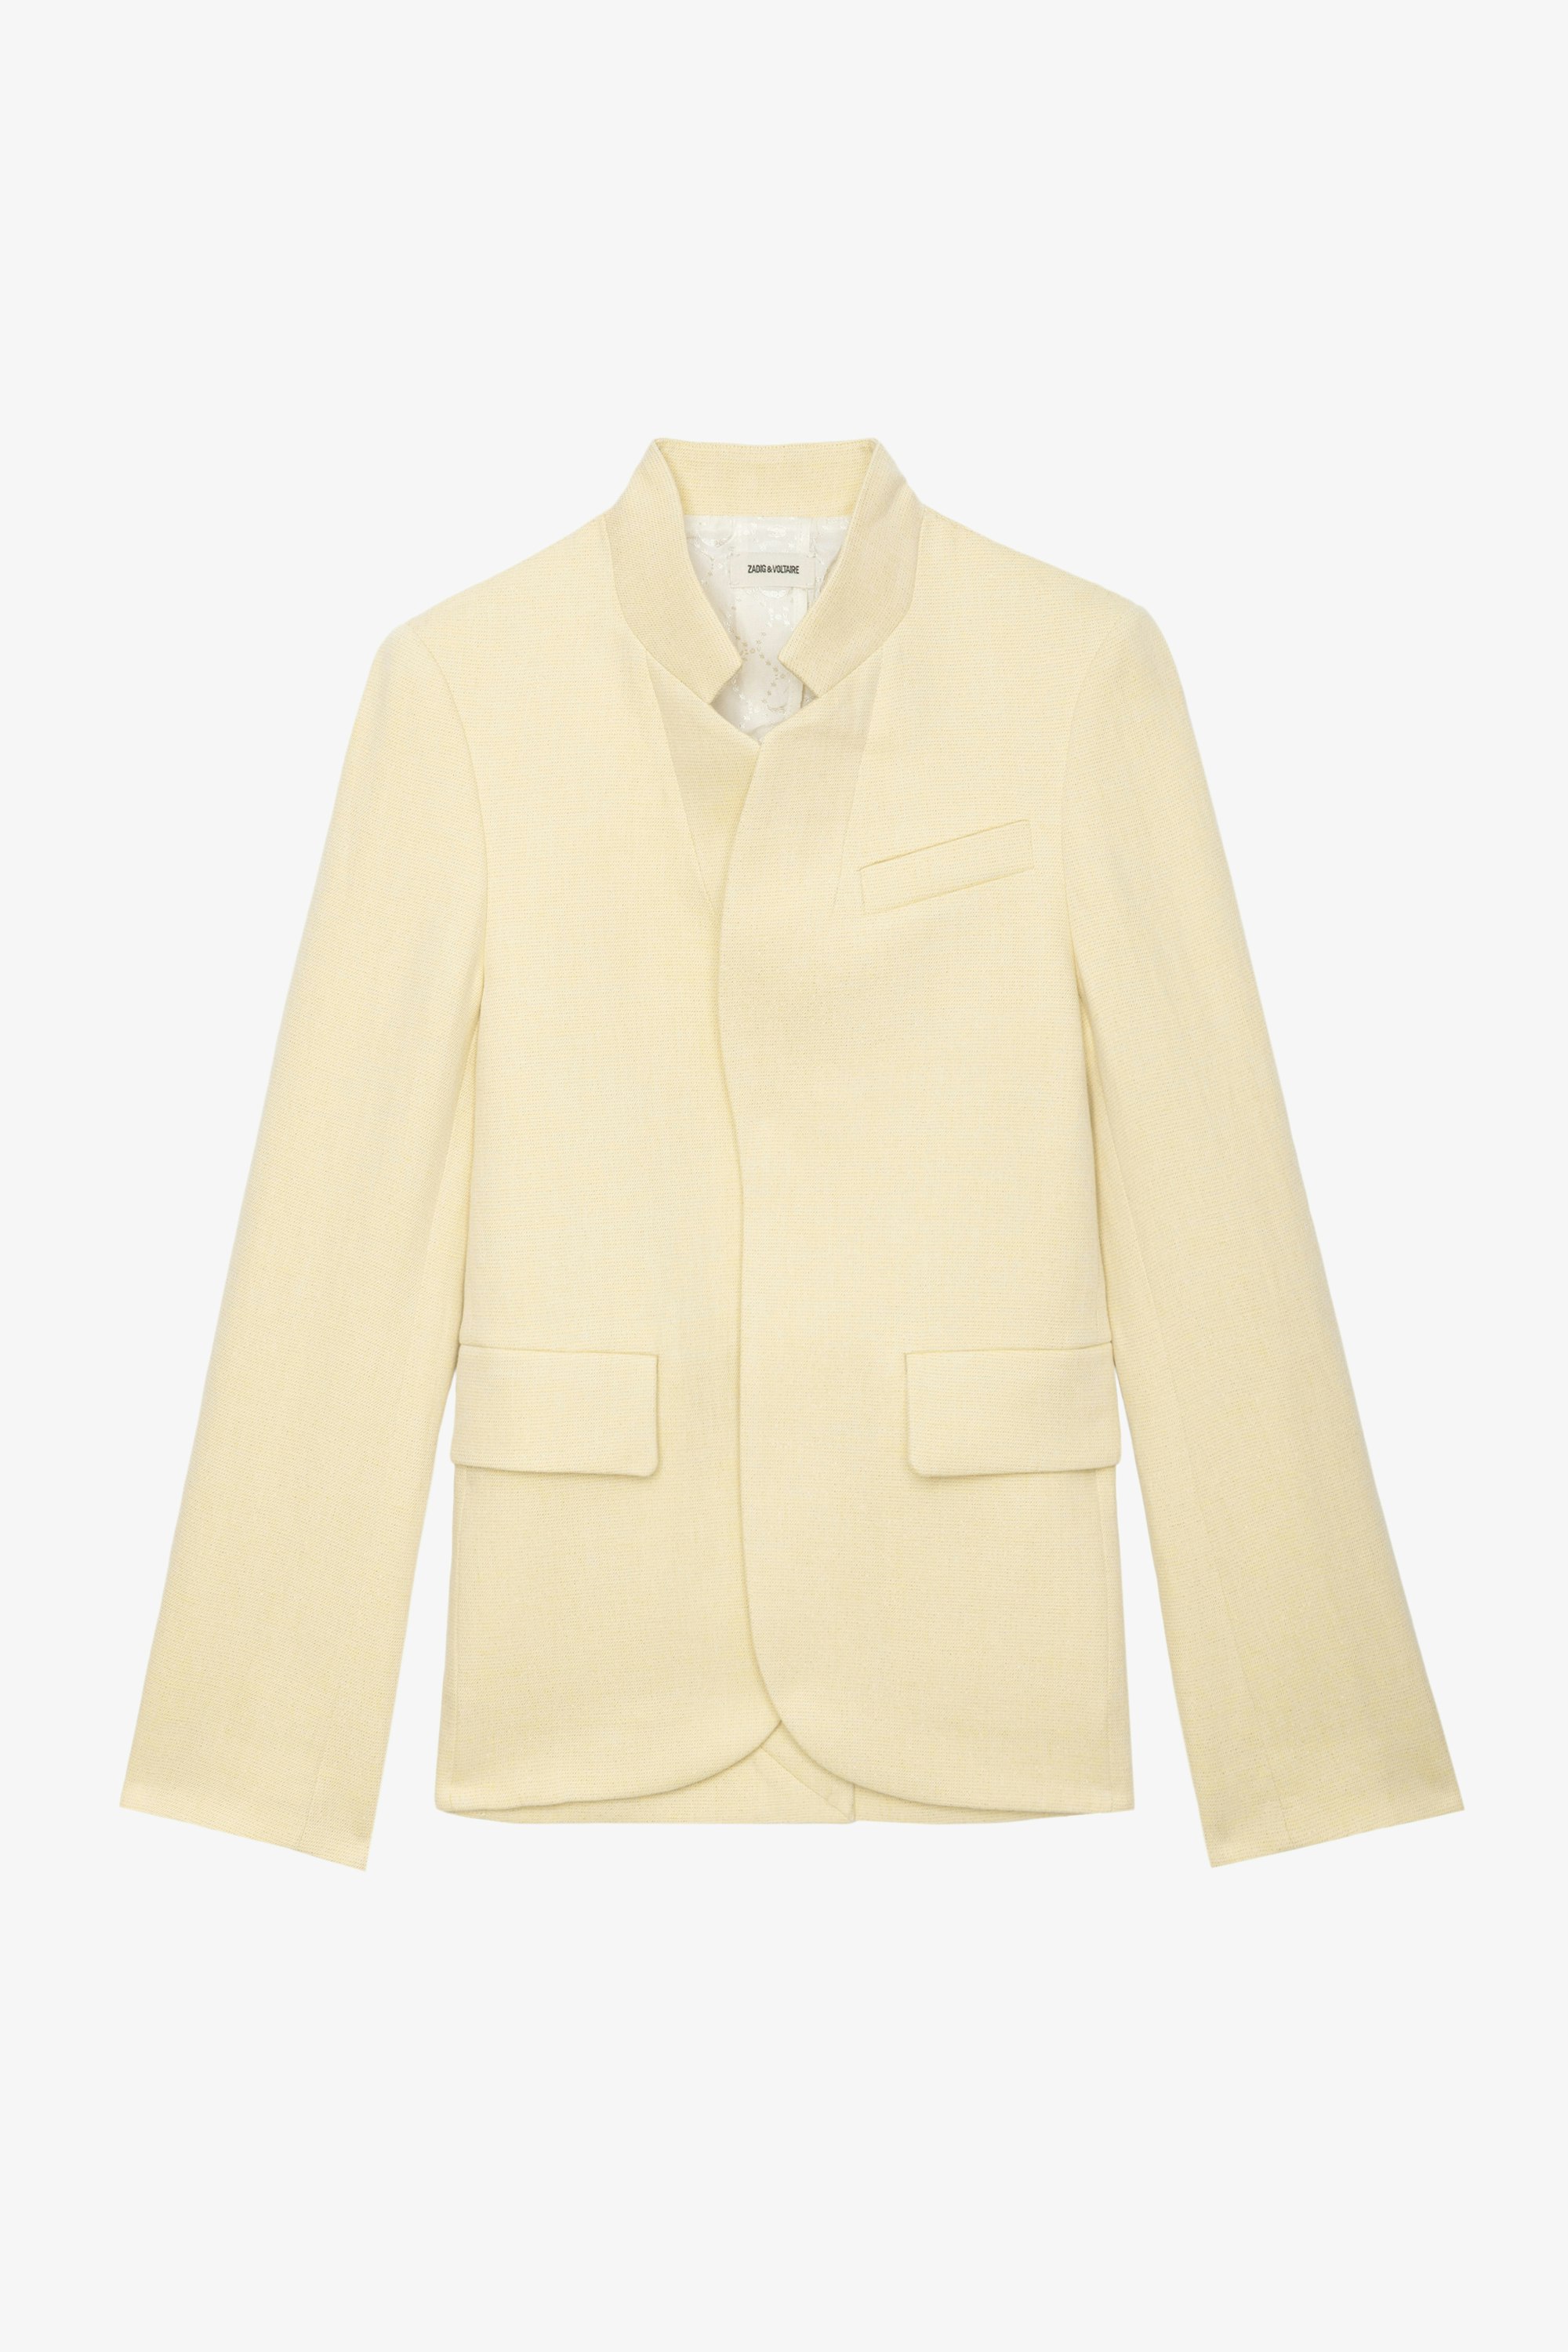 Very Linen Blazer - Light yellow linen tailored blazer with mock neck and pockets.